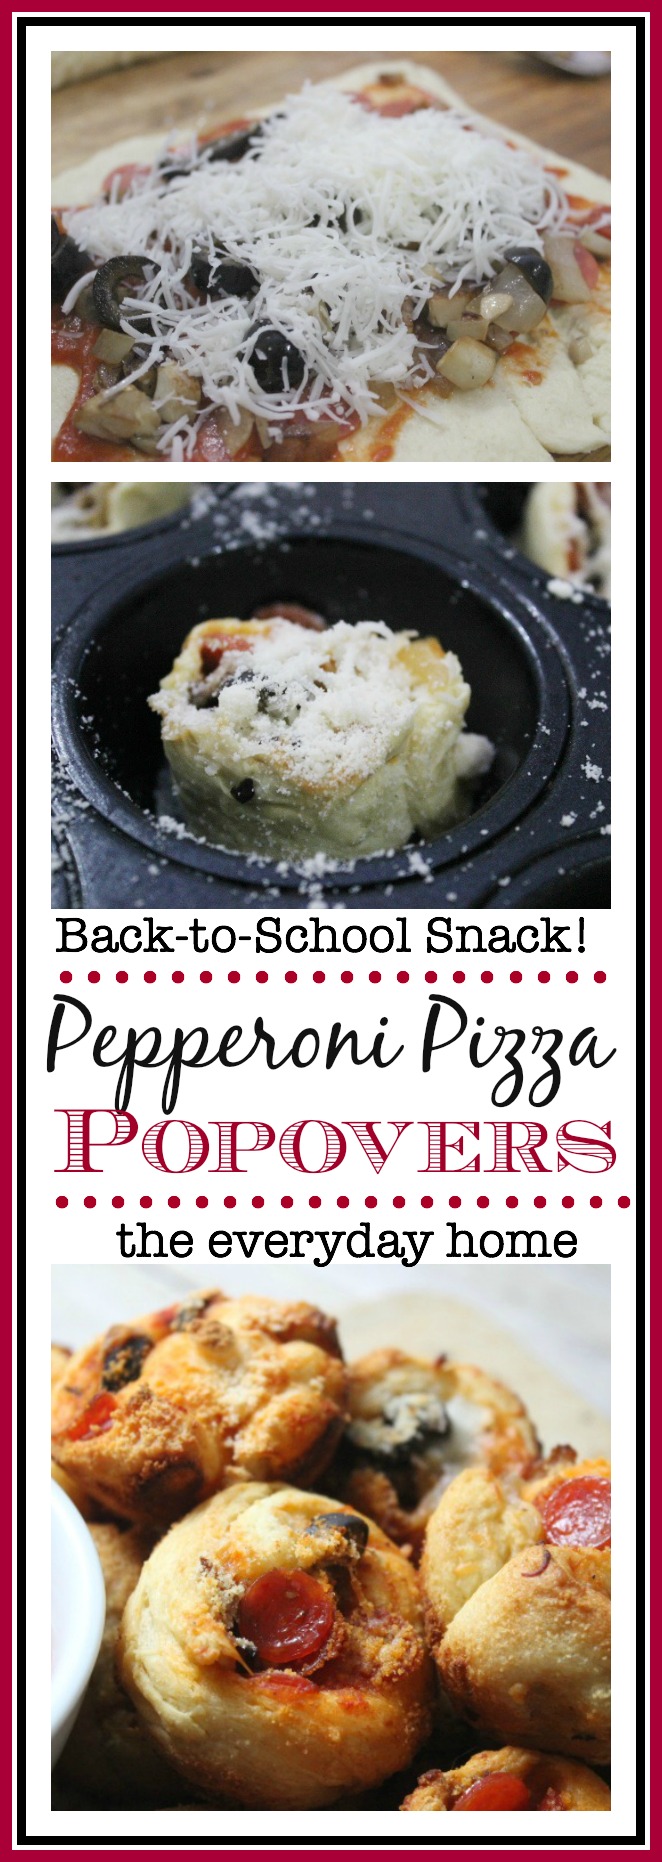 Pepperoni Pizza Popovers by The Everyday Home  #backtoschool #pizza #Pillsbury #easy #recipe #theeverydayhome